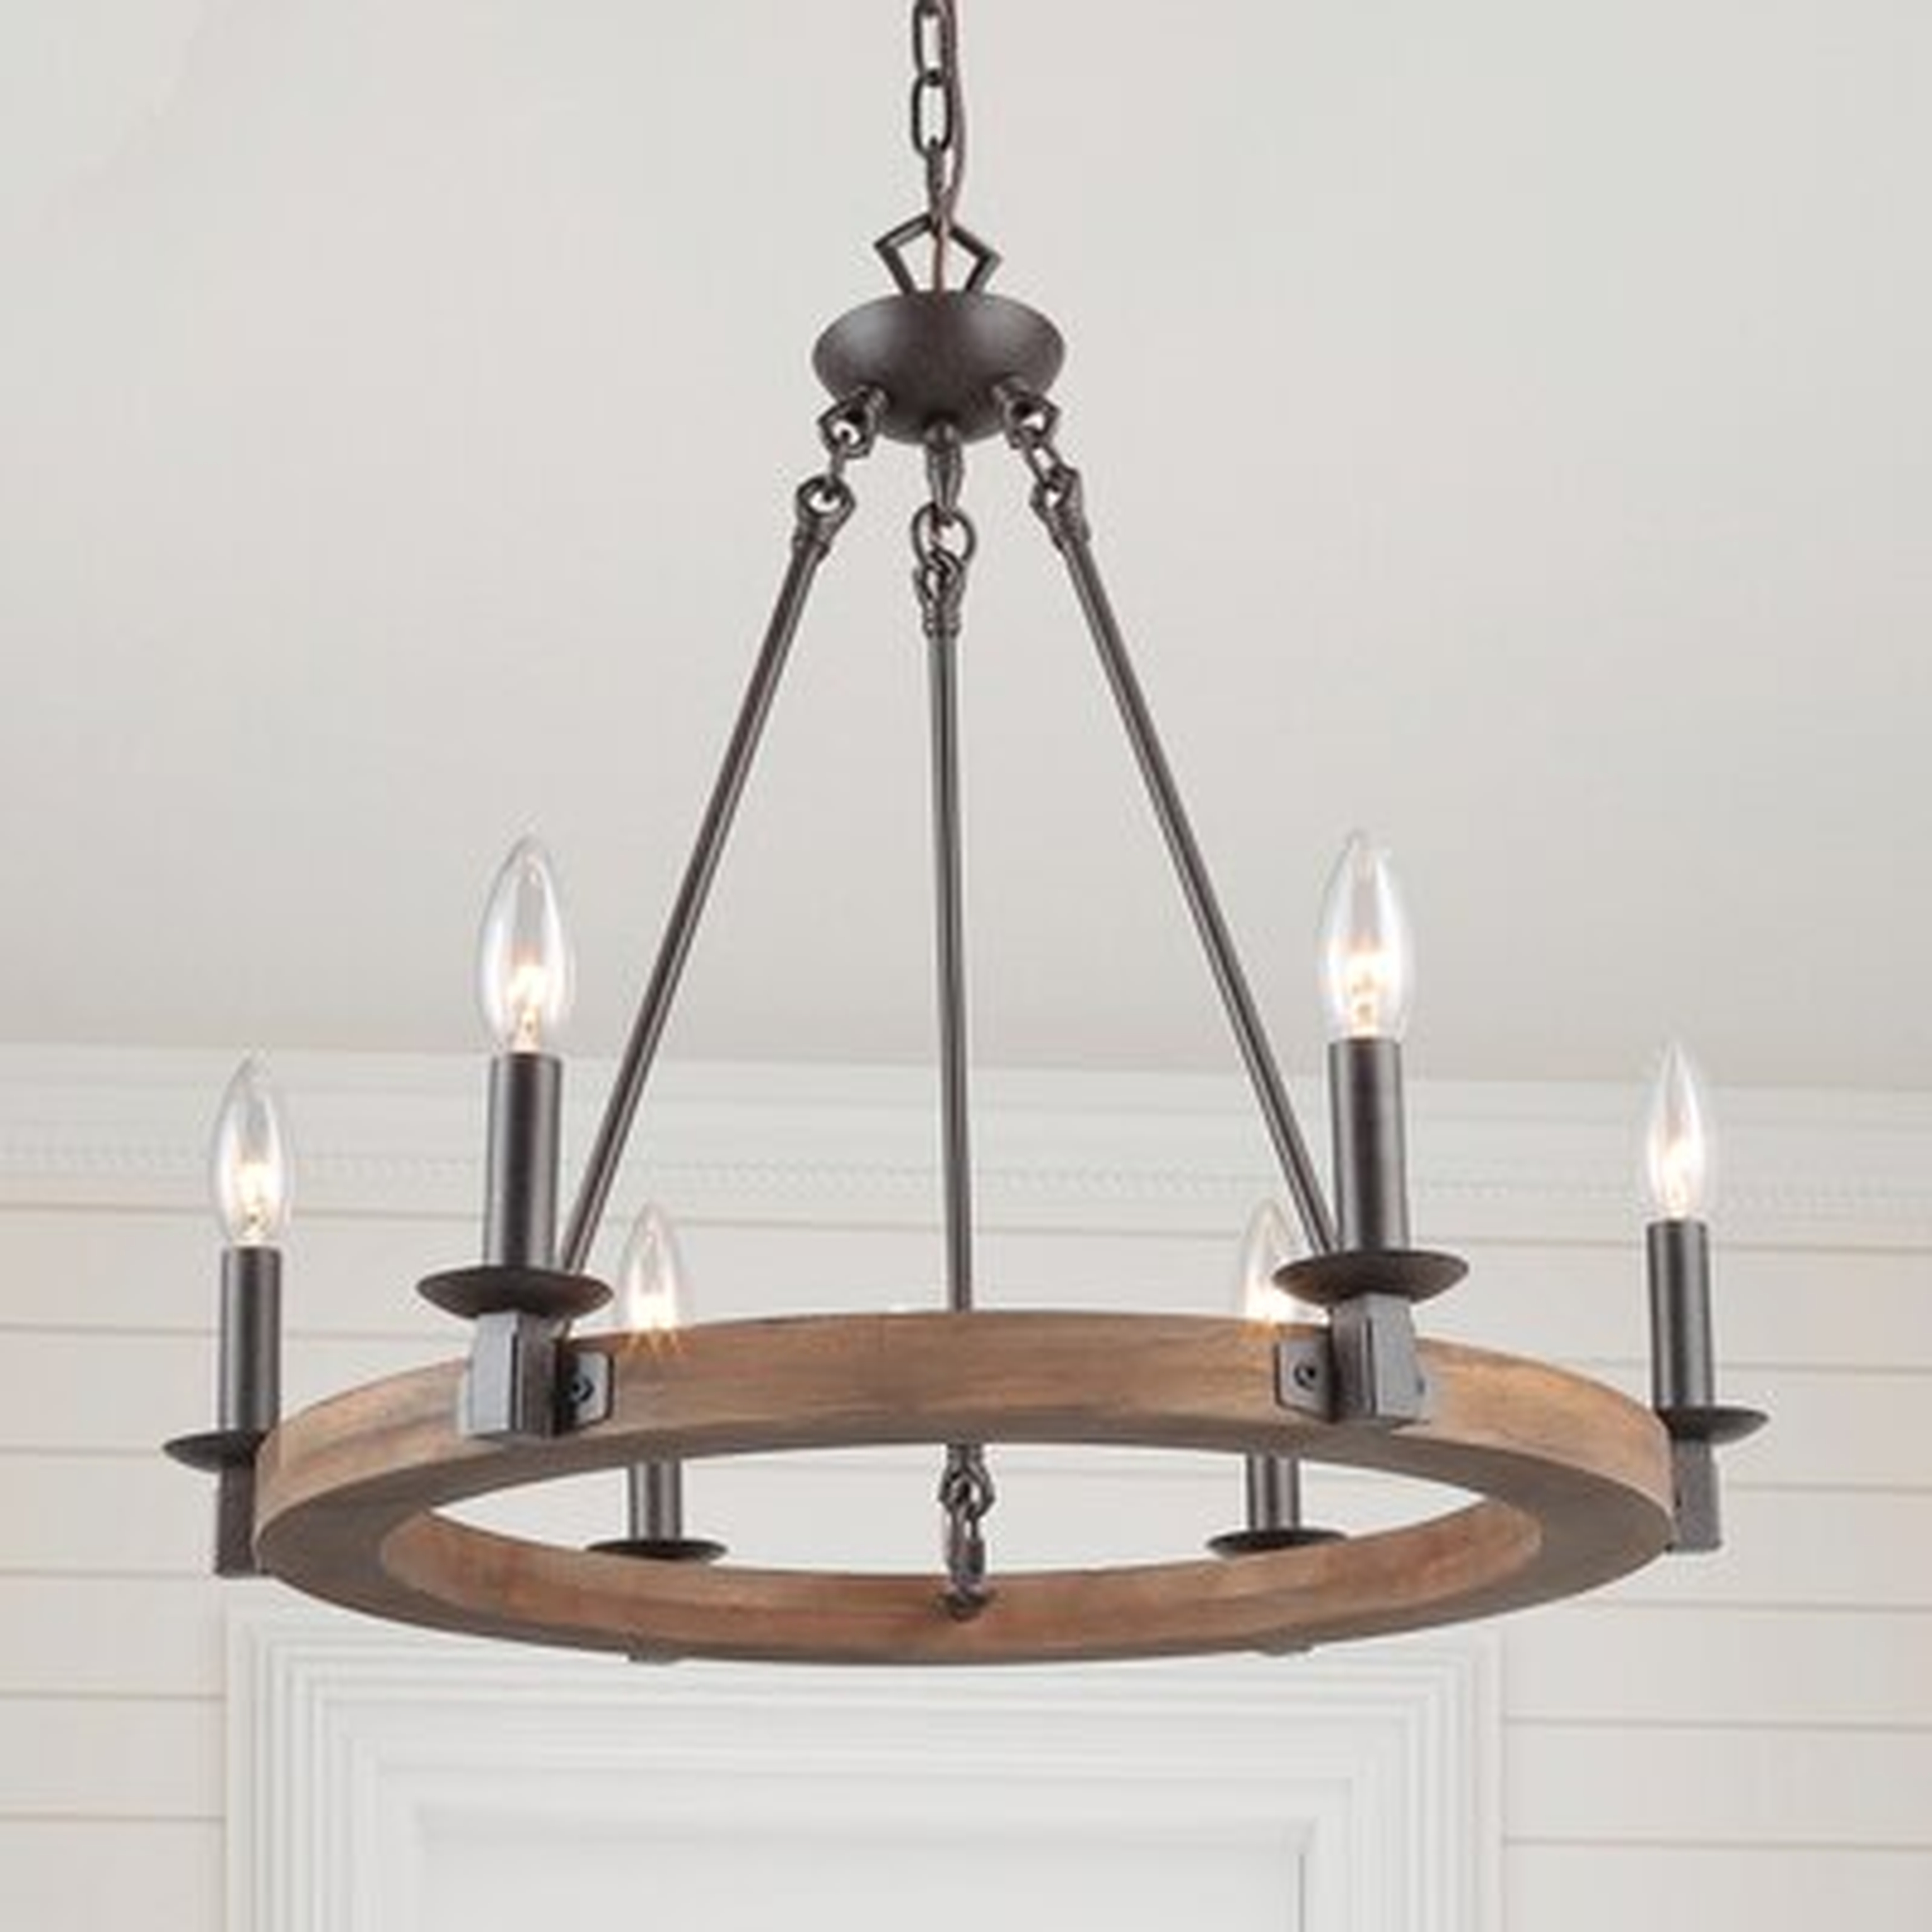 Sabio 5 - Light Candle Style Wagon Wheel Chandelier with Wood Accents - Wayfair